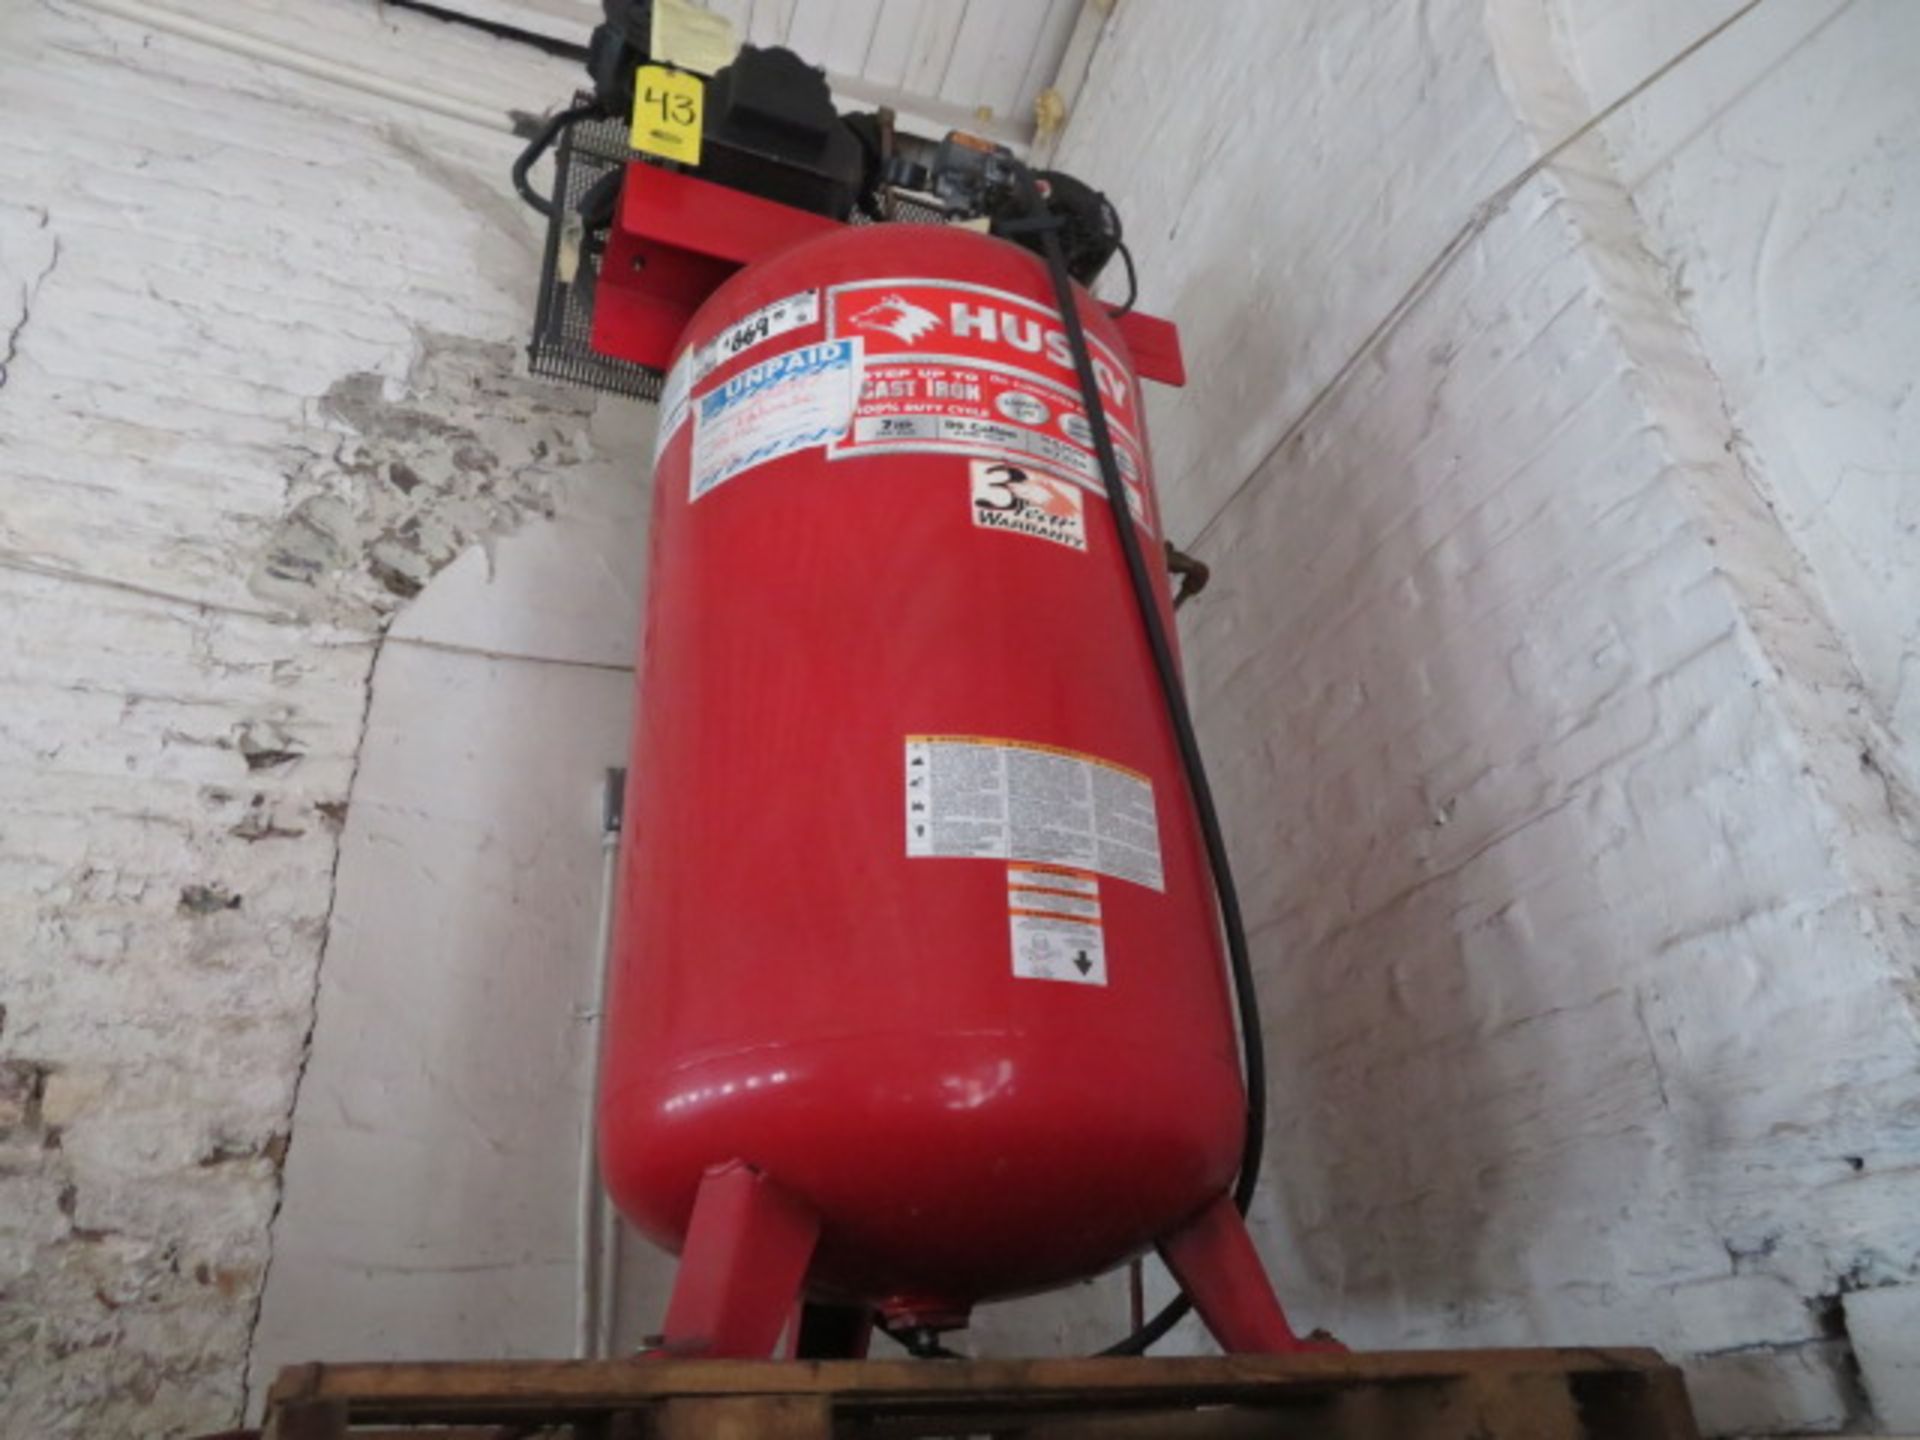 HUSKY 7 HP UPRIGHT AIR COMPRESSOR W/80 GALLON TANK MOUNTED ON 8 FT. SHELF ABOVE FLOOR LEVEL - Image 2 of 3